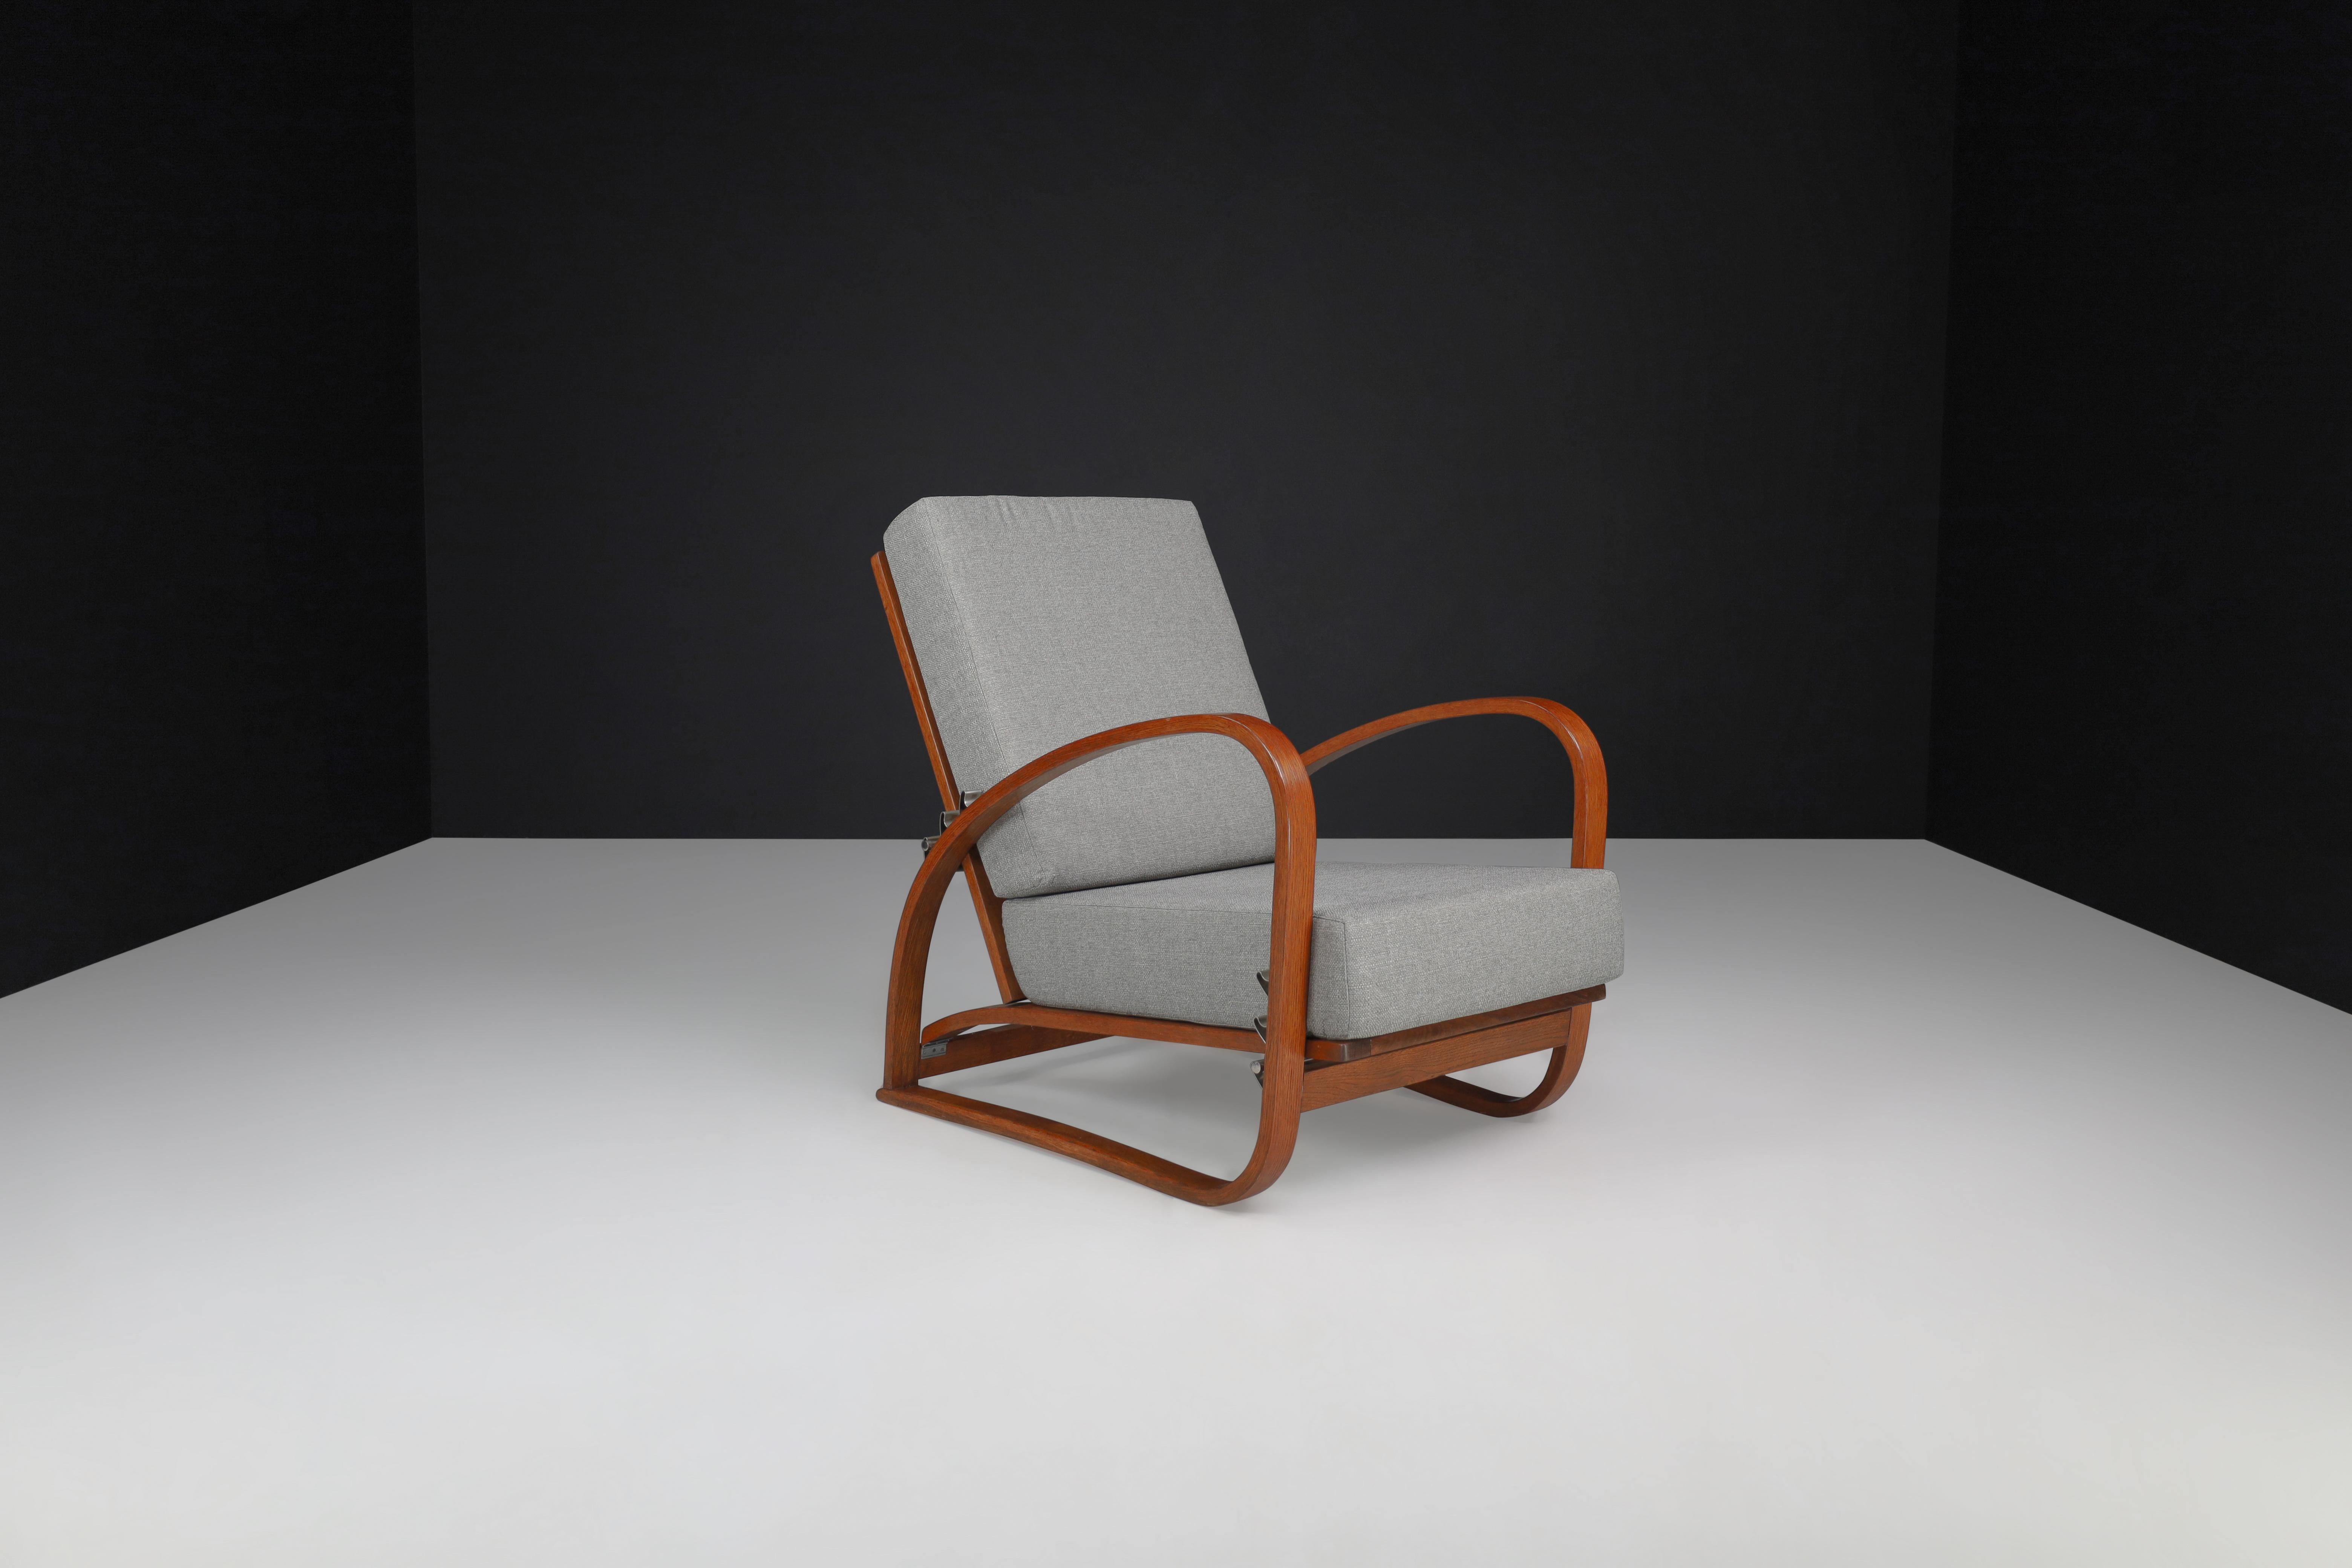 Jindrich Halabala Adjustable H-70 Oak Bentwood Lounge Chair, Praque 1930s

This H-70 armchair was designed by Jindrich Halabala and produced by Spojene UP Zavody circa 1930. The backrest and seat can be put in three different positions. Extremely